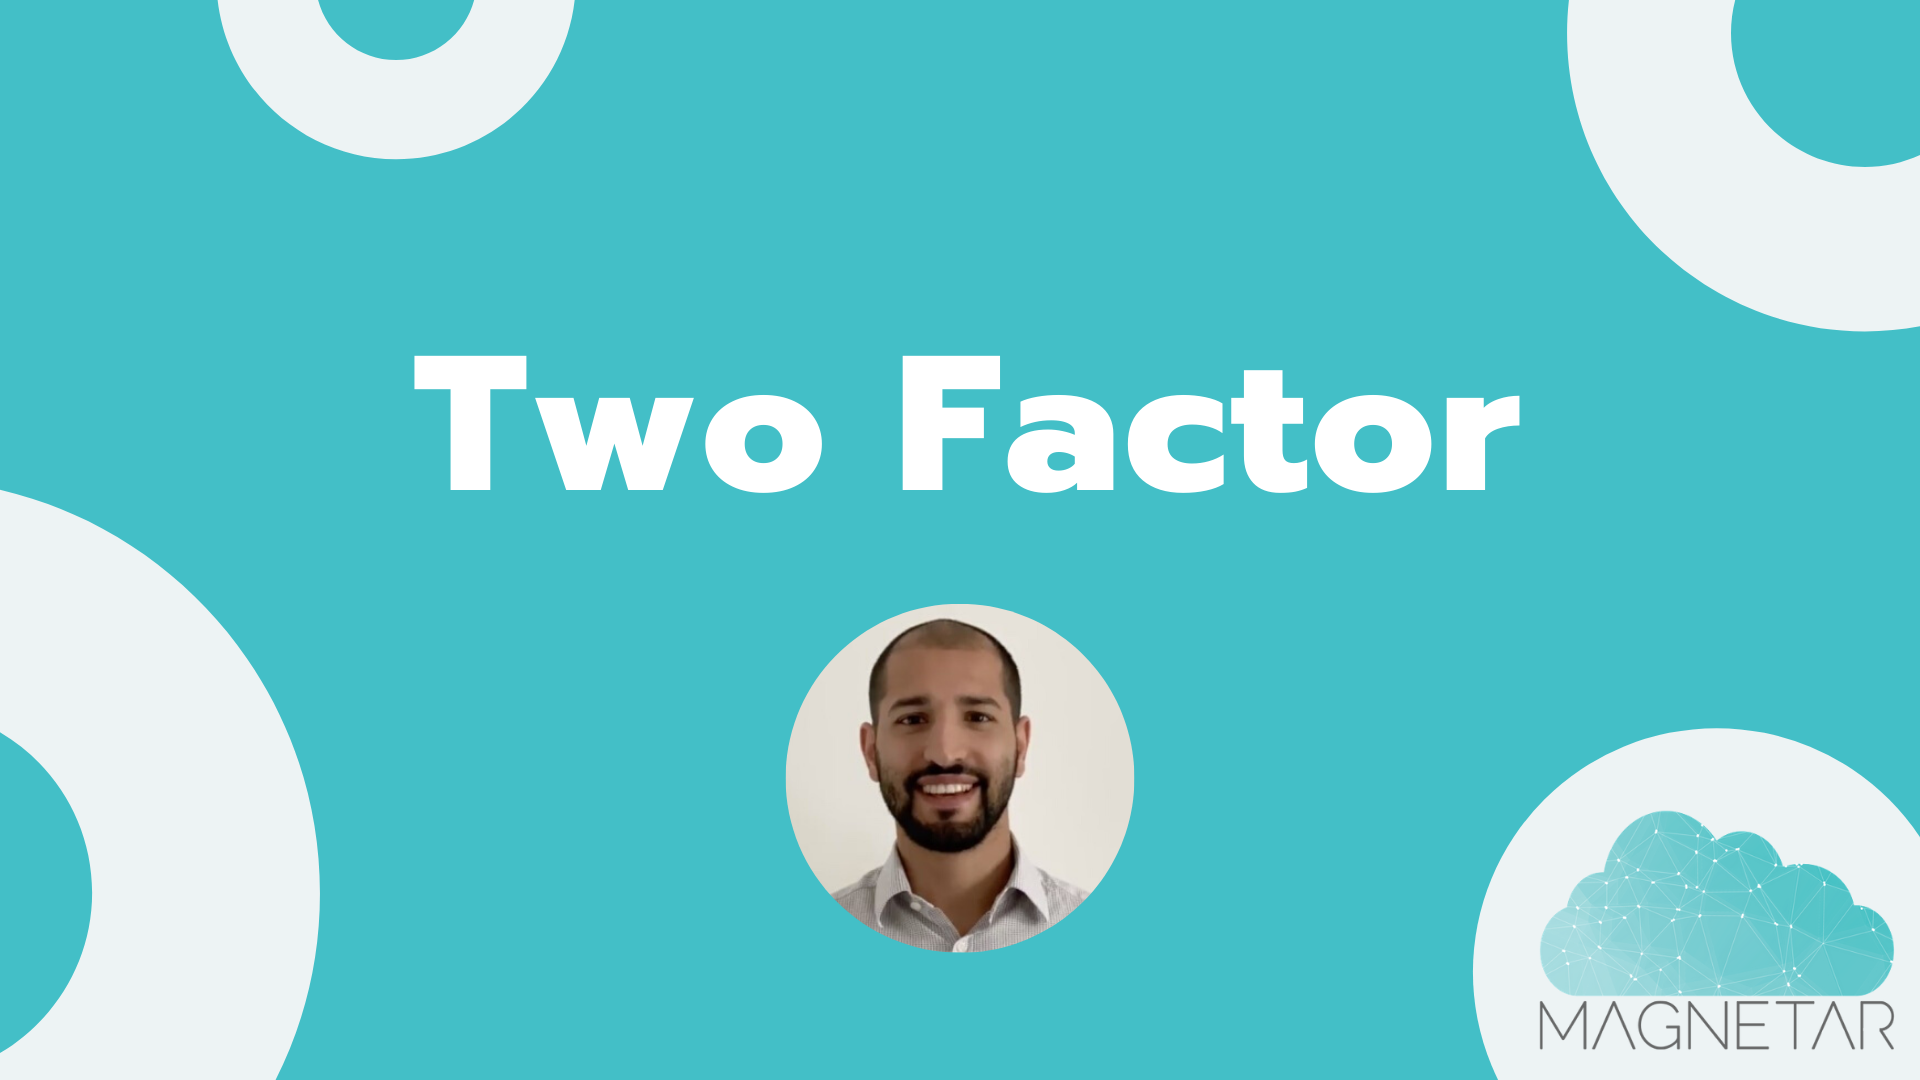 Video: Two Factor